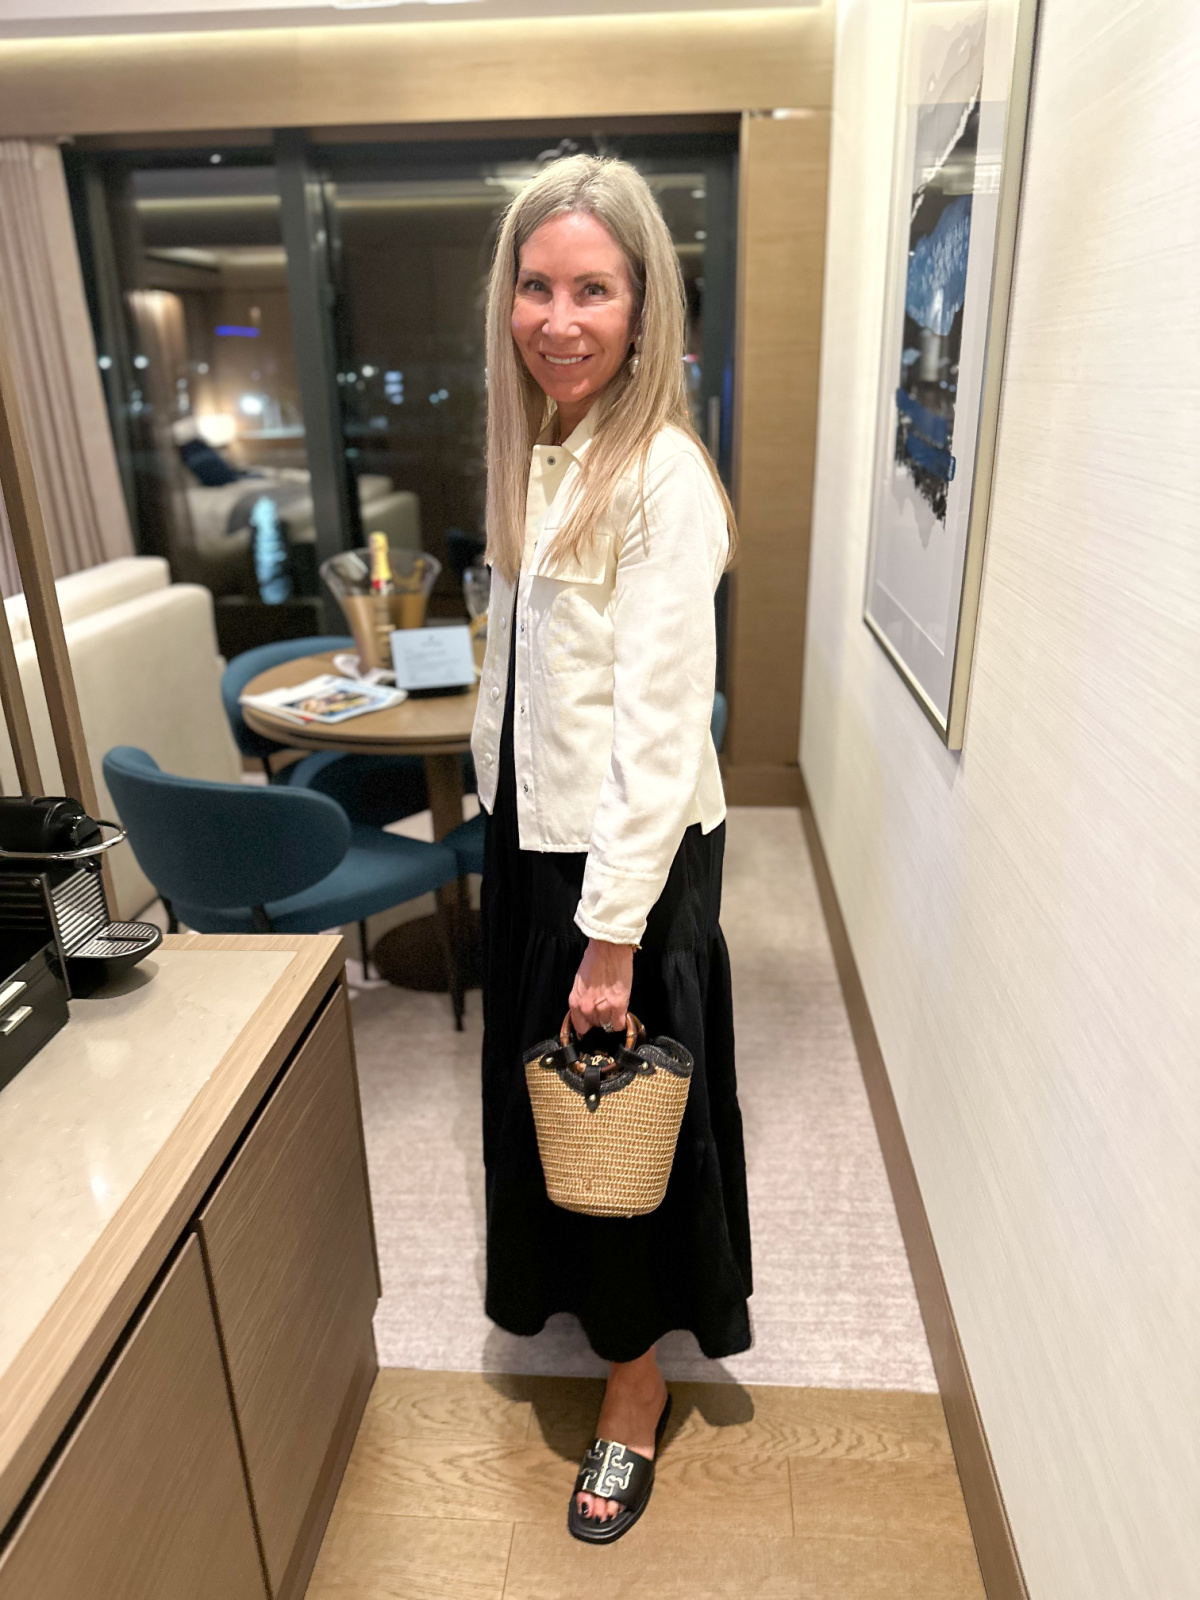 Woman wearing black dress and white jacket in cruise ship cabin.